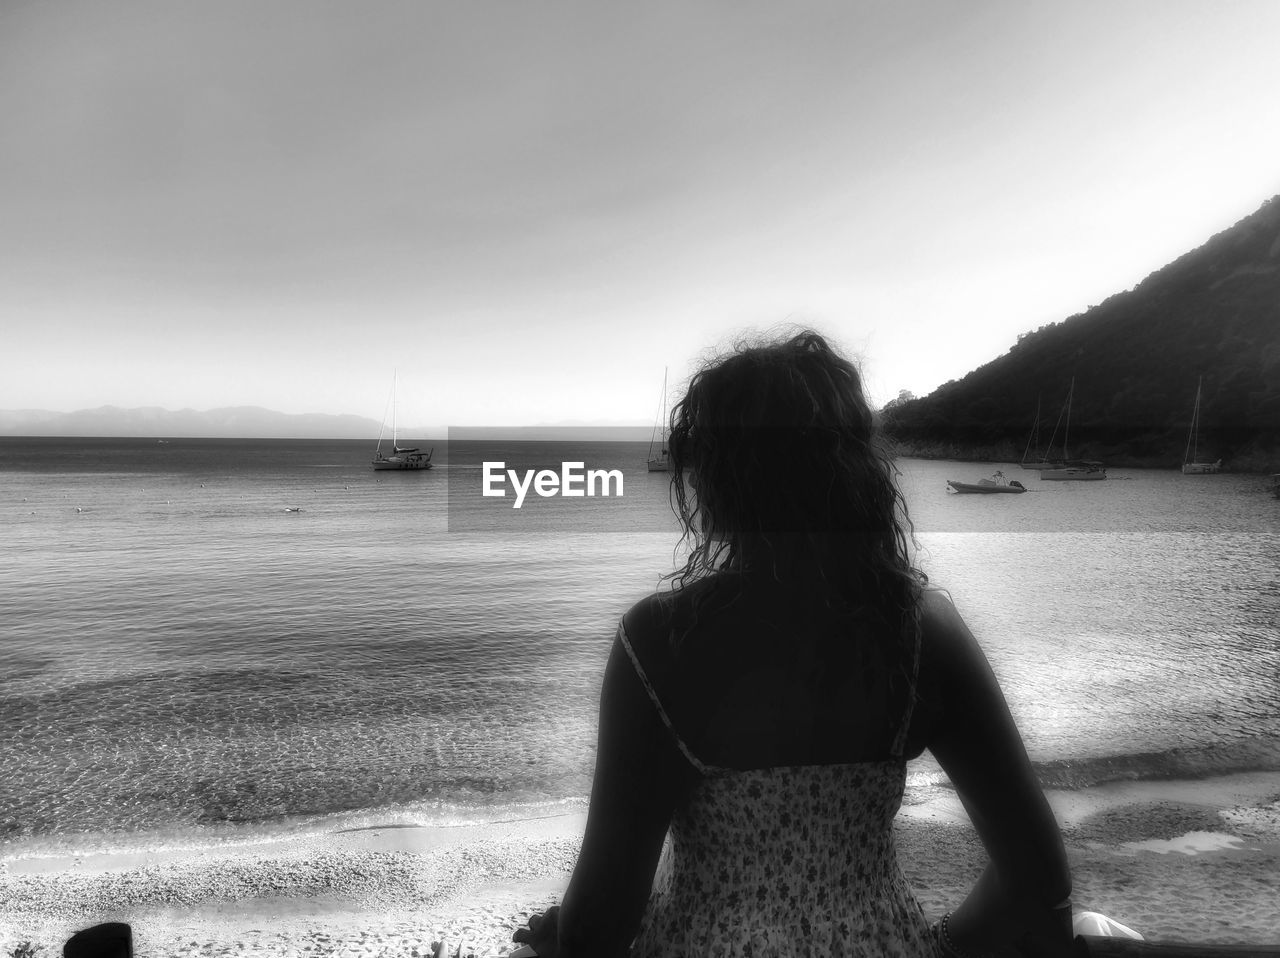 water, black, black and white, one person, sky, land, beach, rear view, monochrome photography, monochrome, white, sea, nature, women, adult, beauty in nature, leisure activity, vacation, tranquility, scenics - nature, trip, holiday, hairstyle, long hair, tranquil scene, lifestyles, solitude, waist up, young adult, day, horizon, cloud, outdoors, standing, three quarter length, relaxation, sunlight, non-urban scene, sitting, person, loneliness, sand, horizon over water, idyllic, dress, female, ocean, contemplation, clothing, looking at view